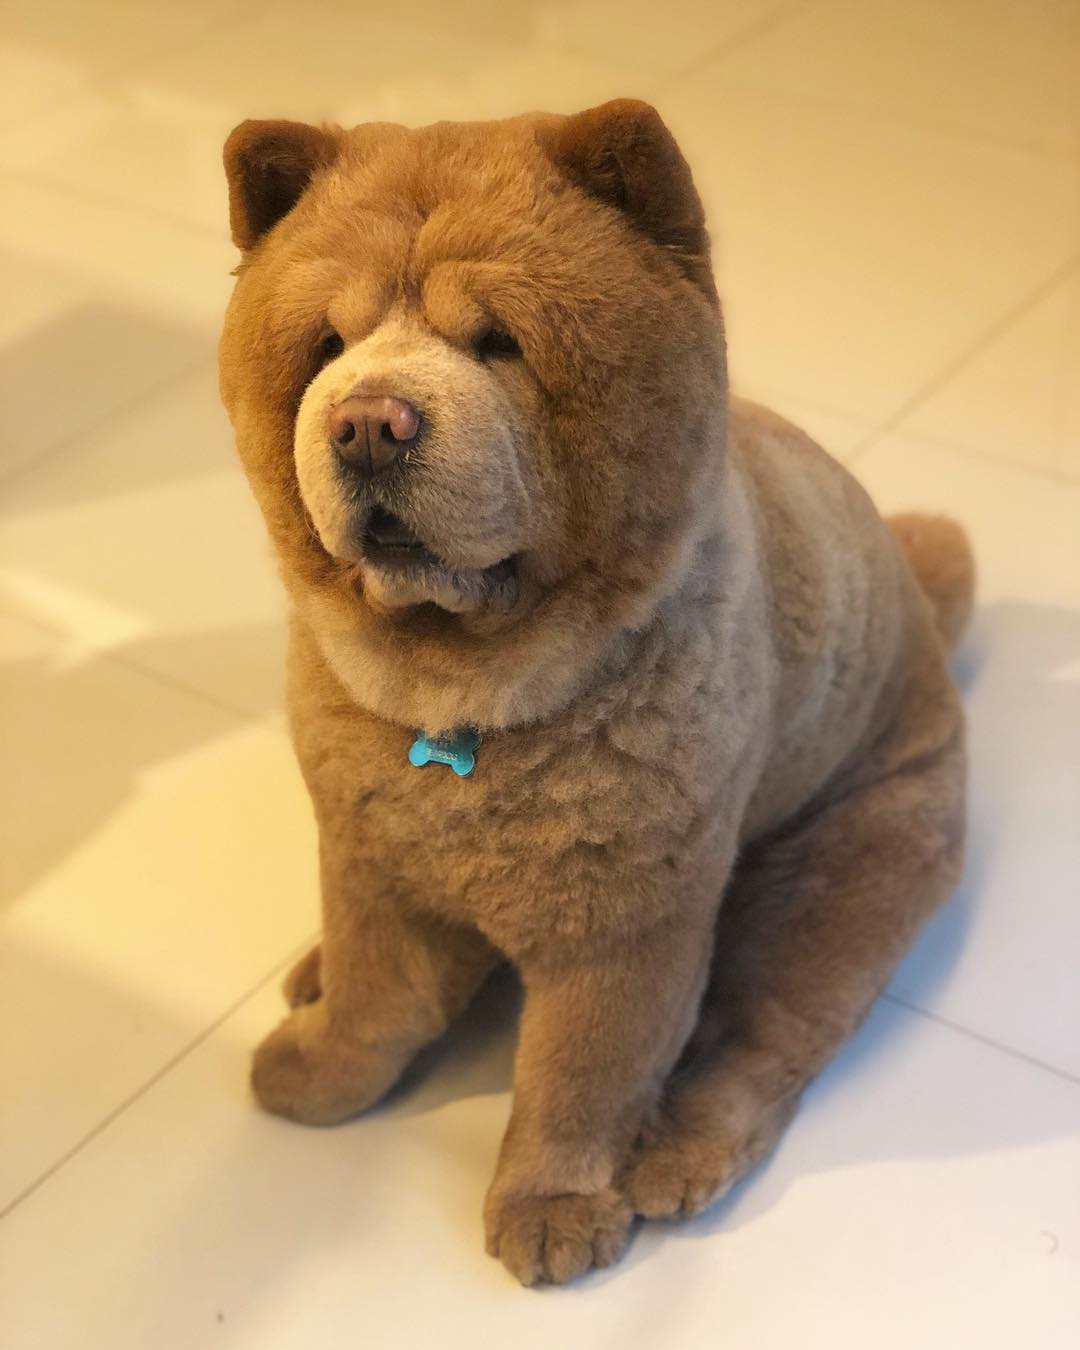 Big Dogs That Look Like Teddy Bears - Photos All Recommendation